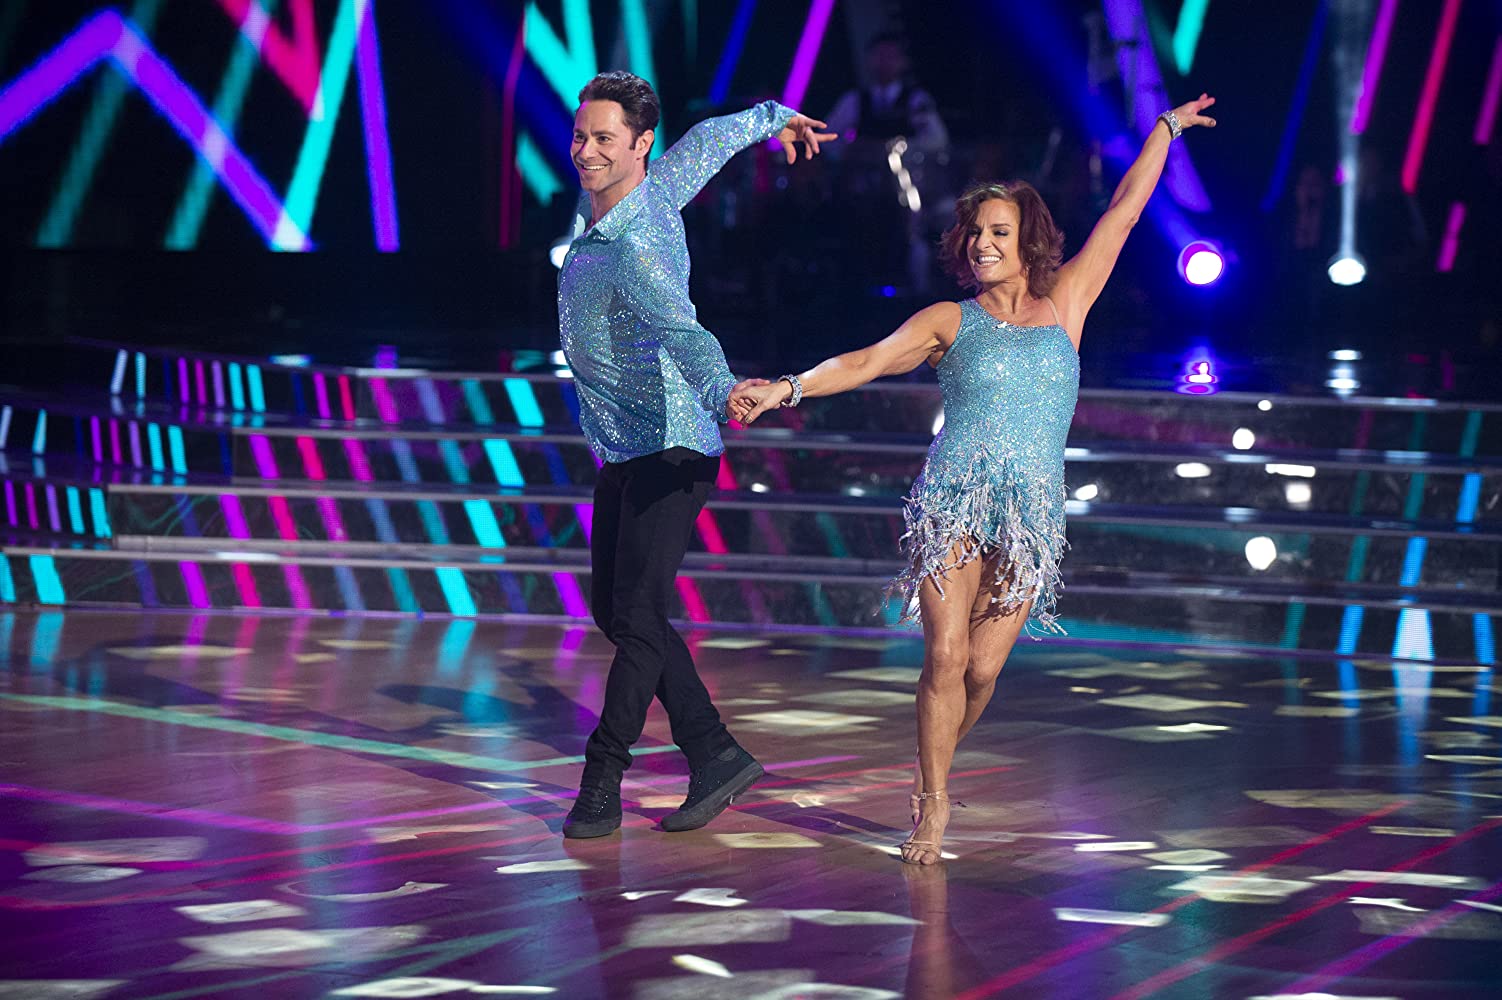 Mary Lou Retton and Sasha Farber in "Dancing with the Stars". 